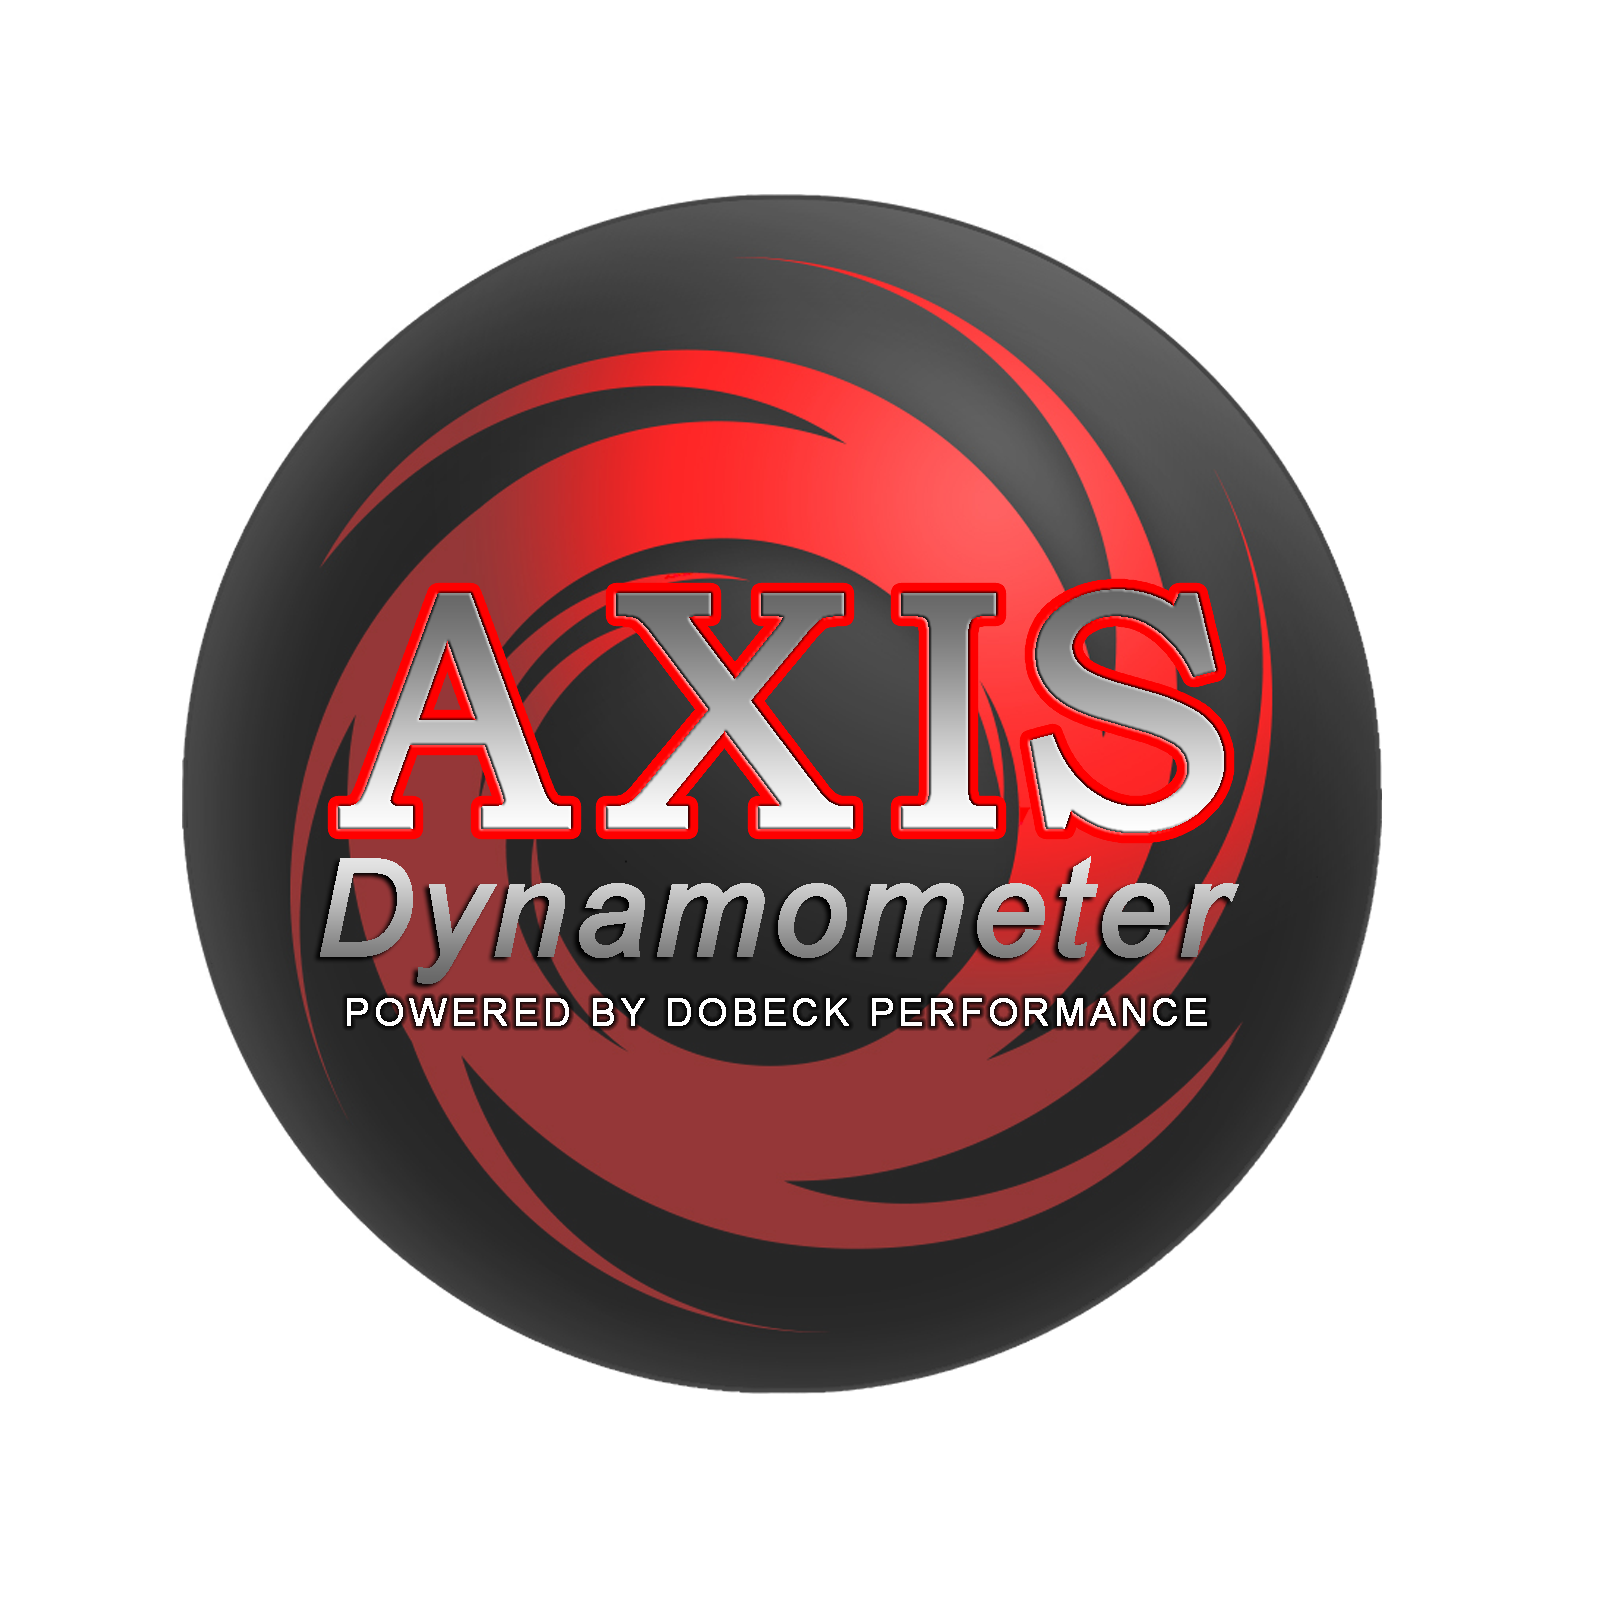 AXIS Dynamometer